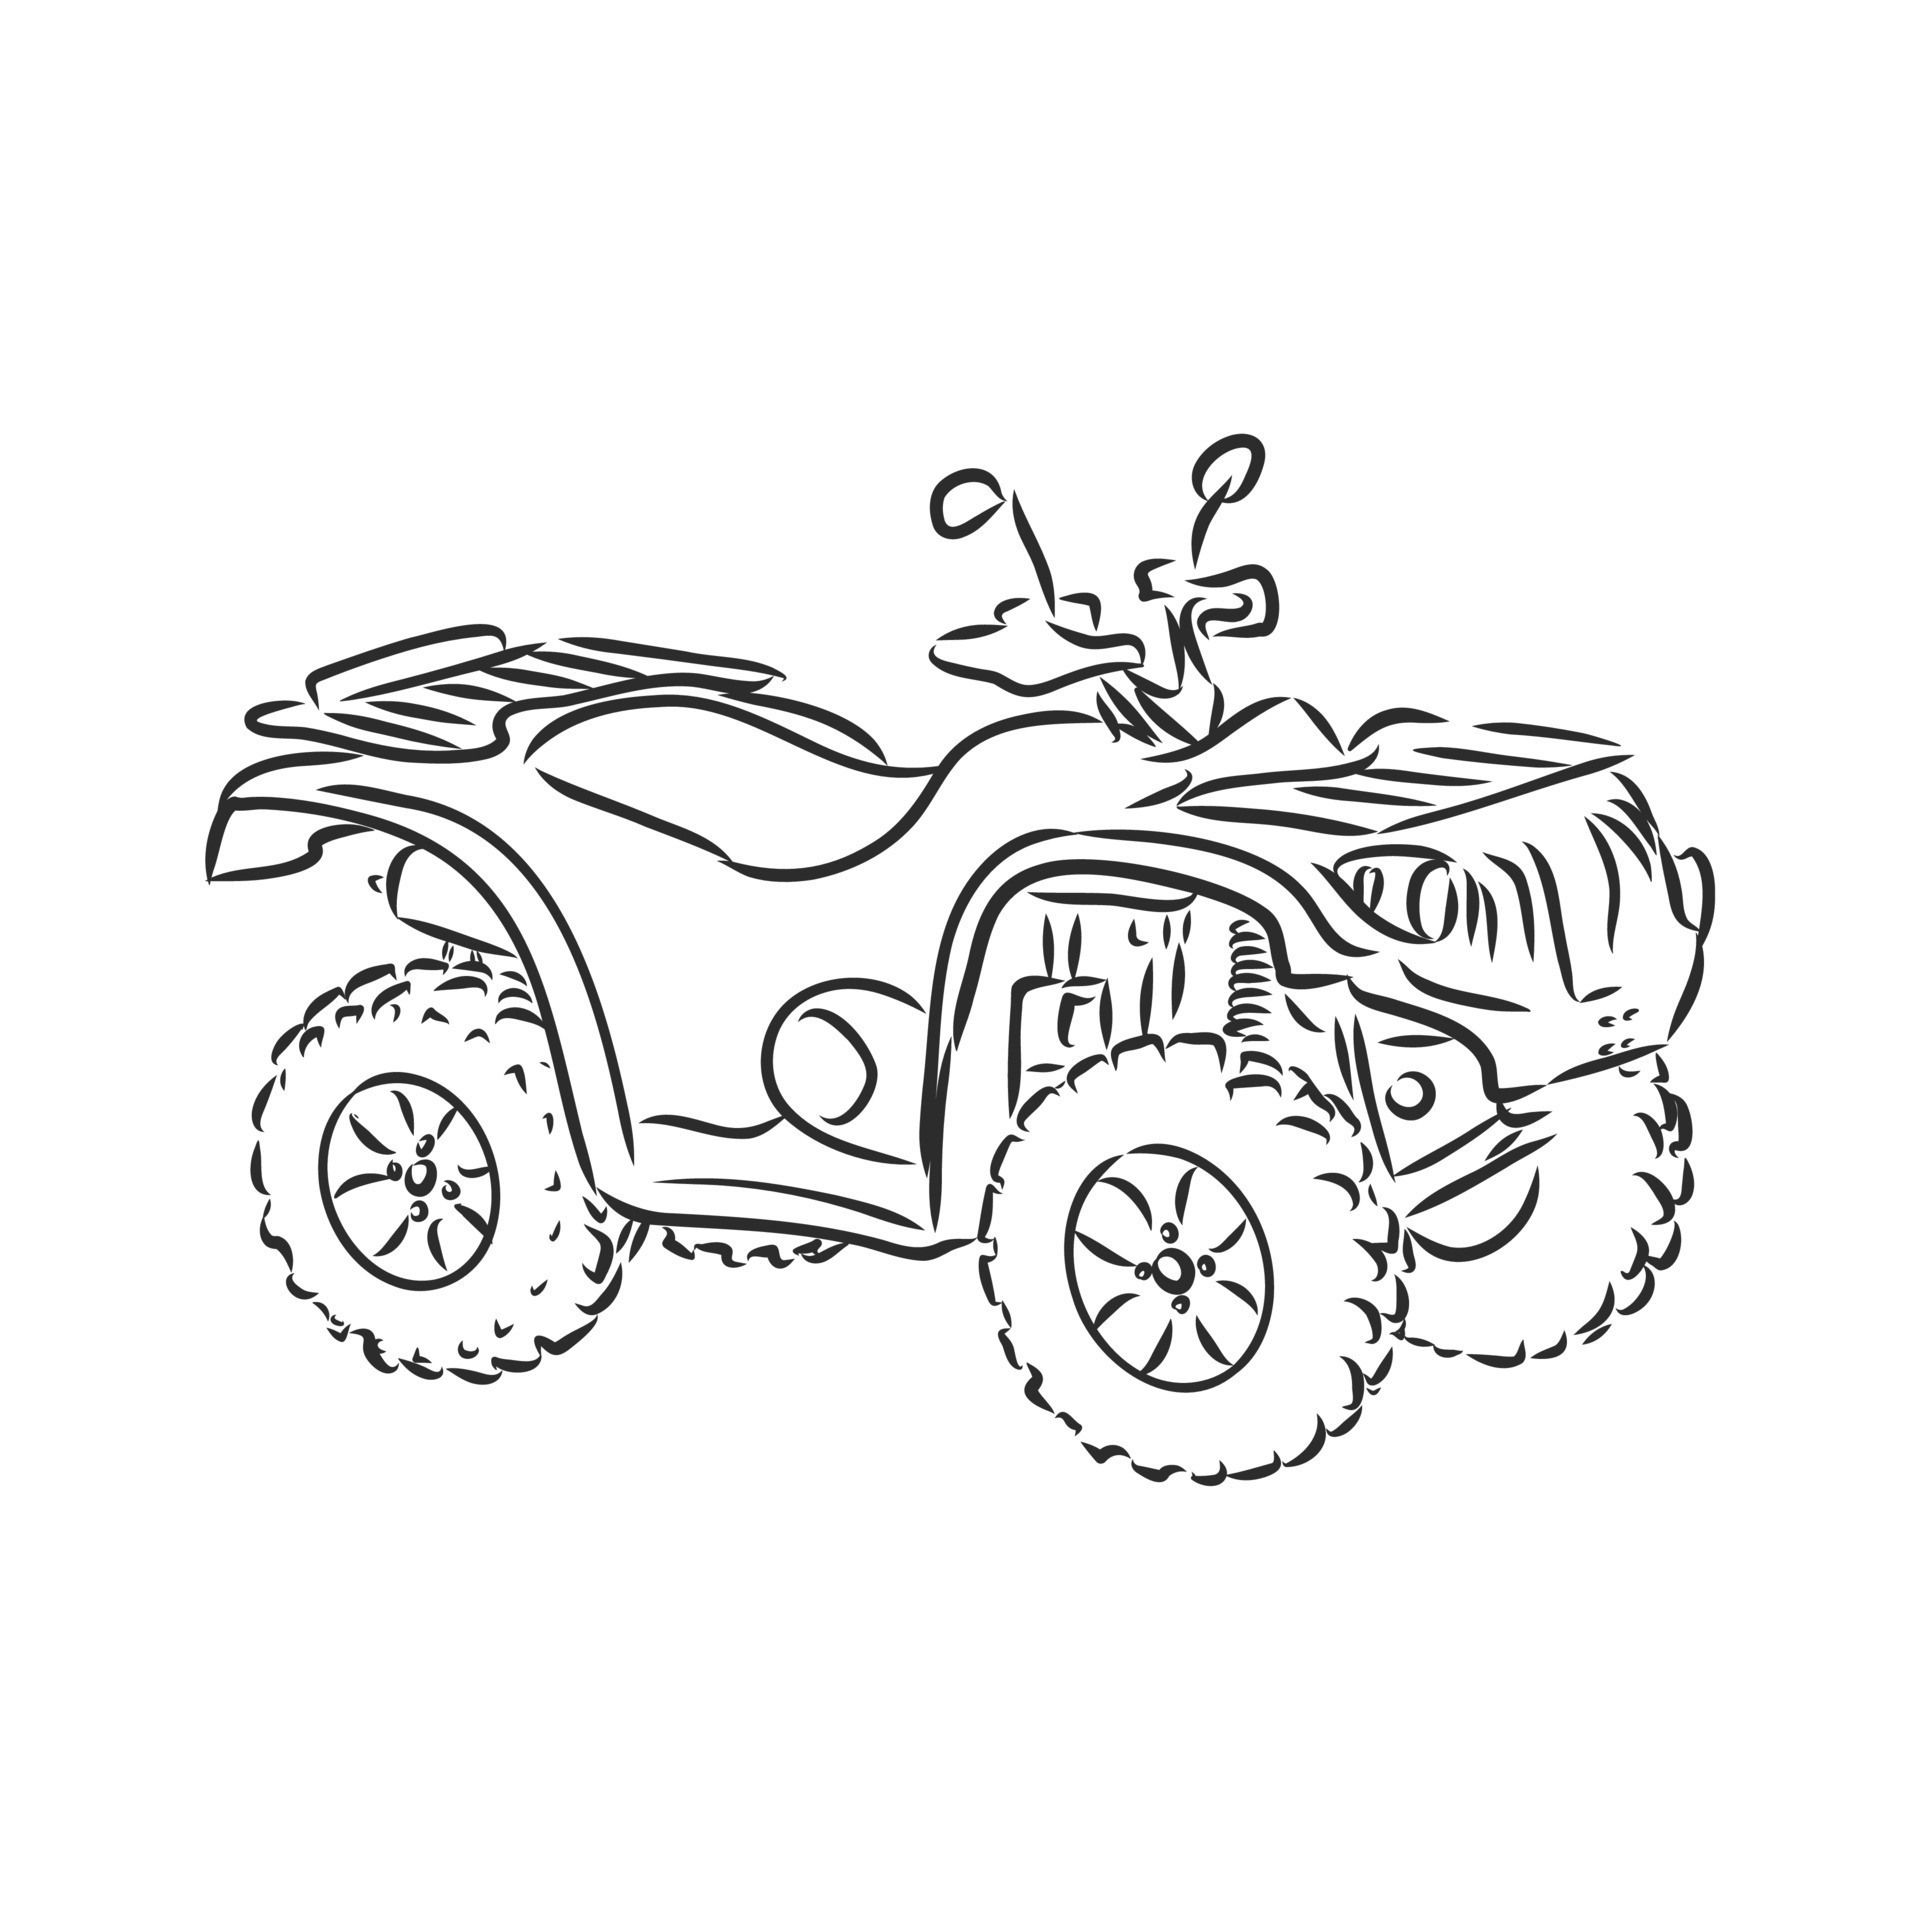 Amazing quad bike coloring pages for kids